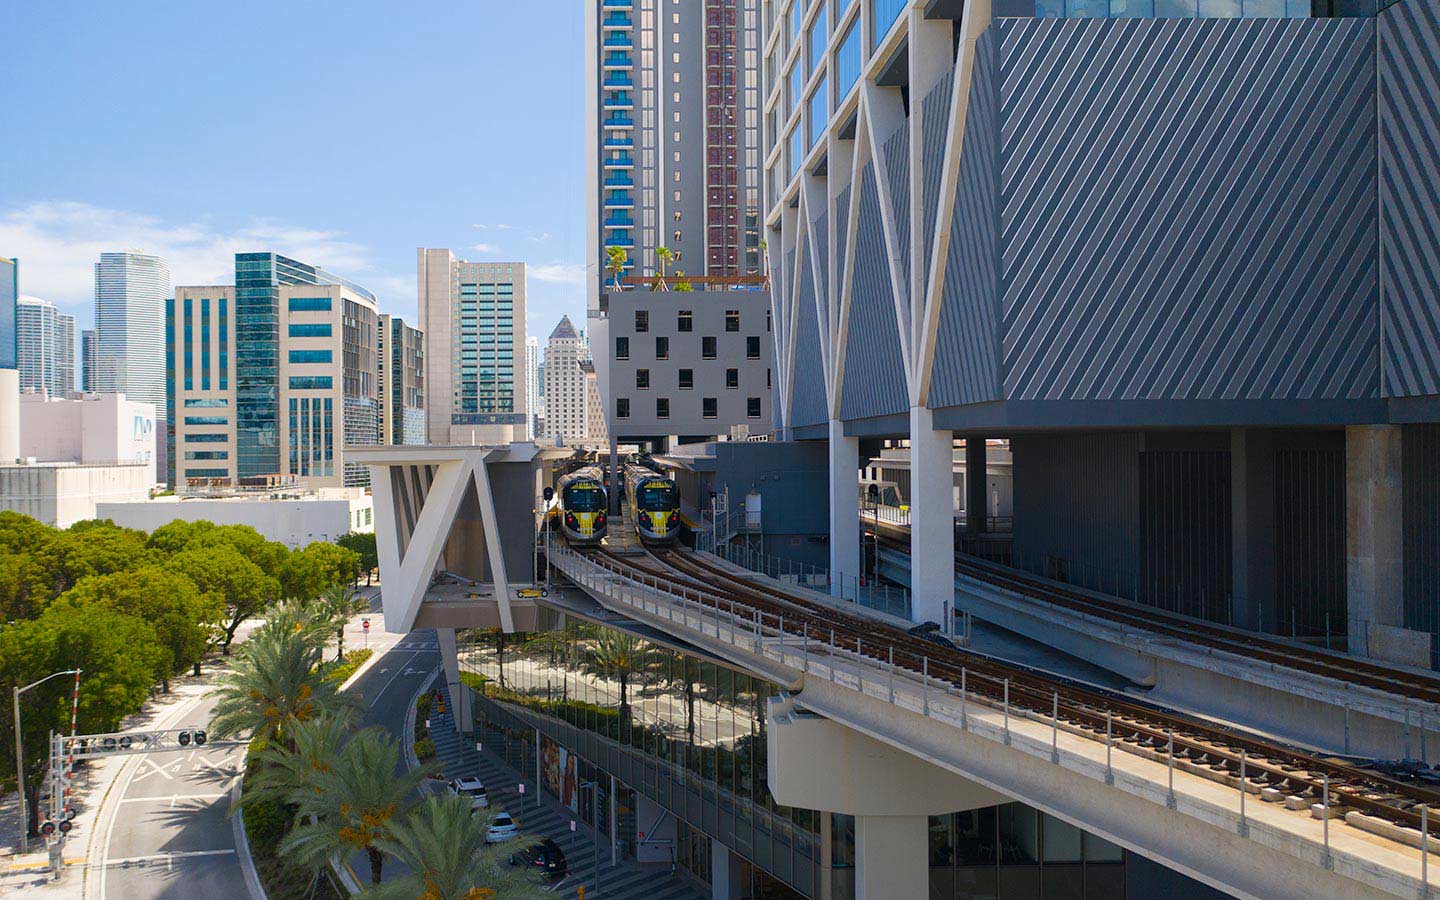 Brightline high-speed train station in Downtown Miami